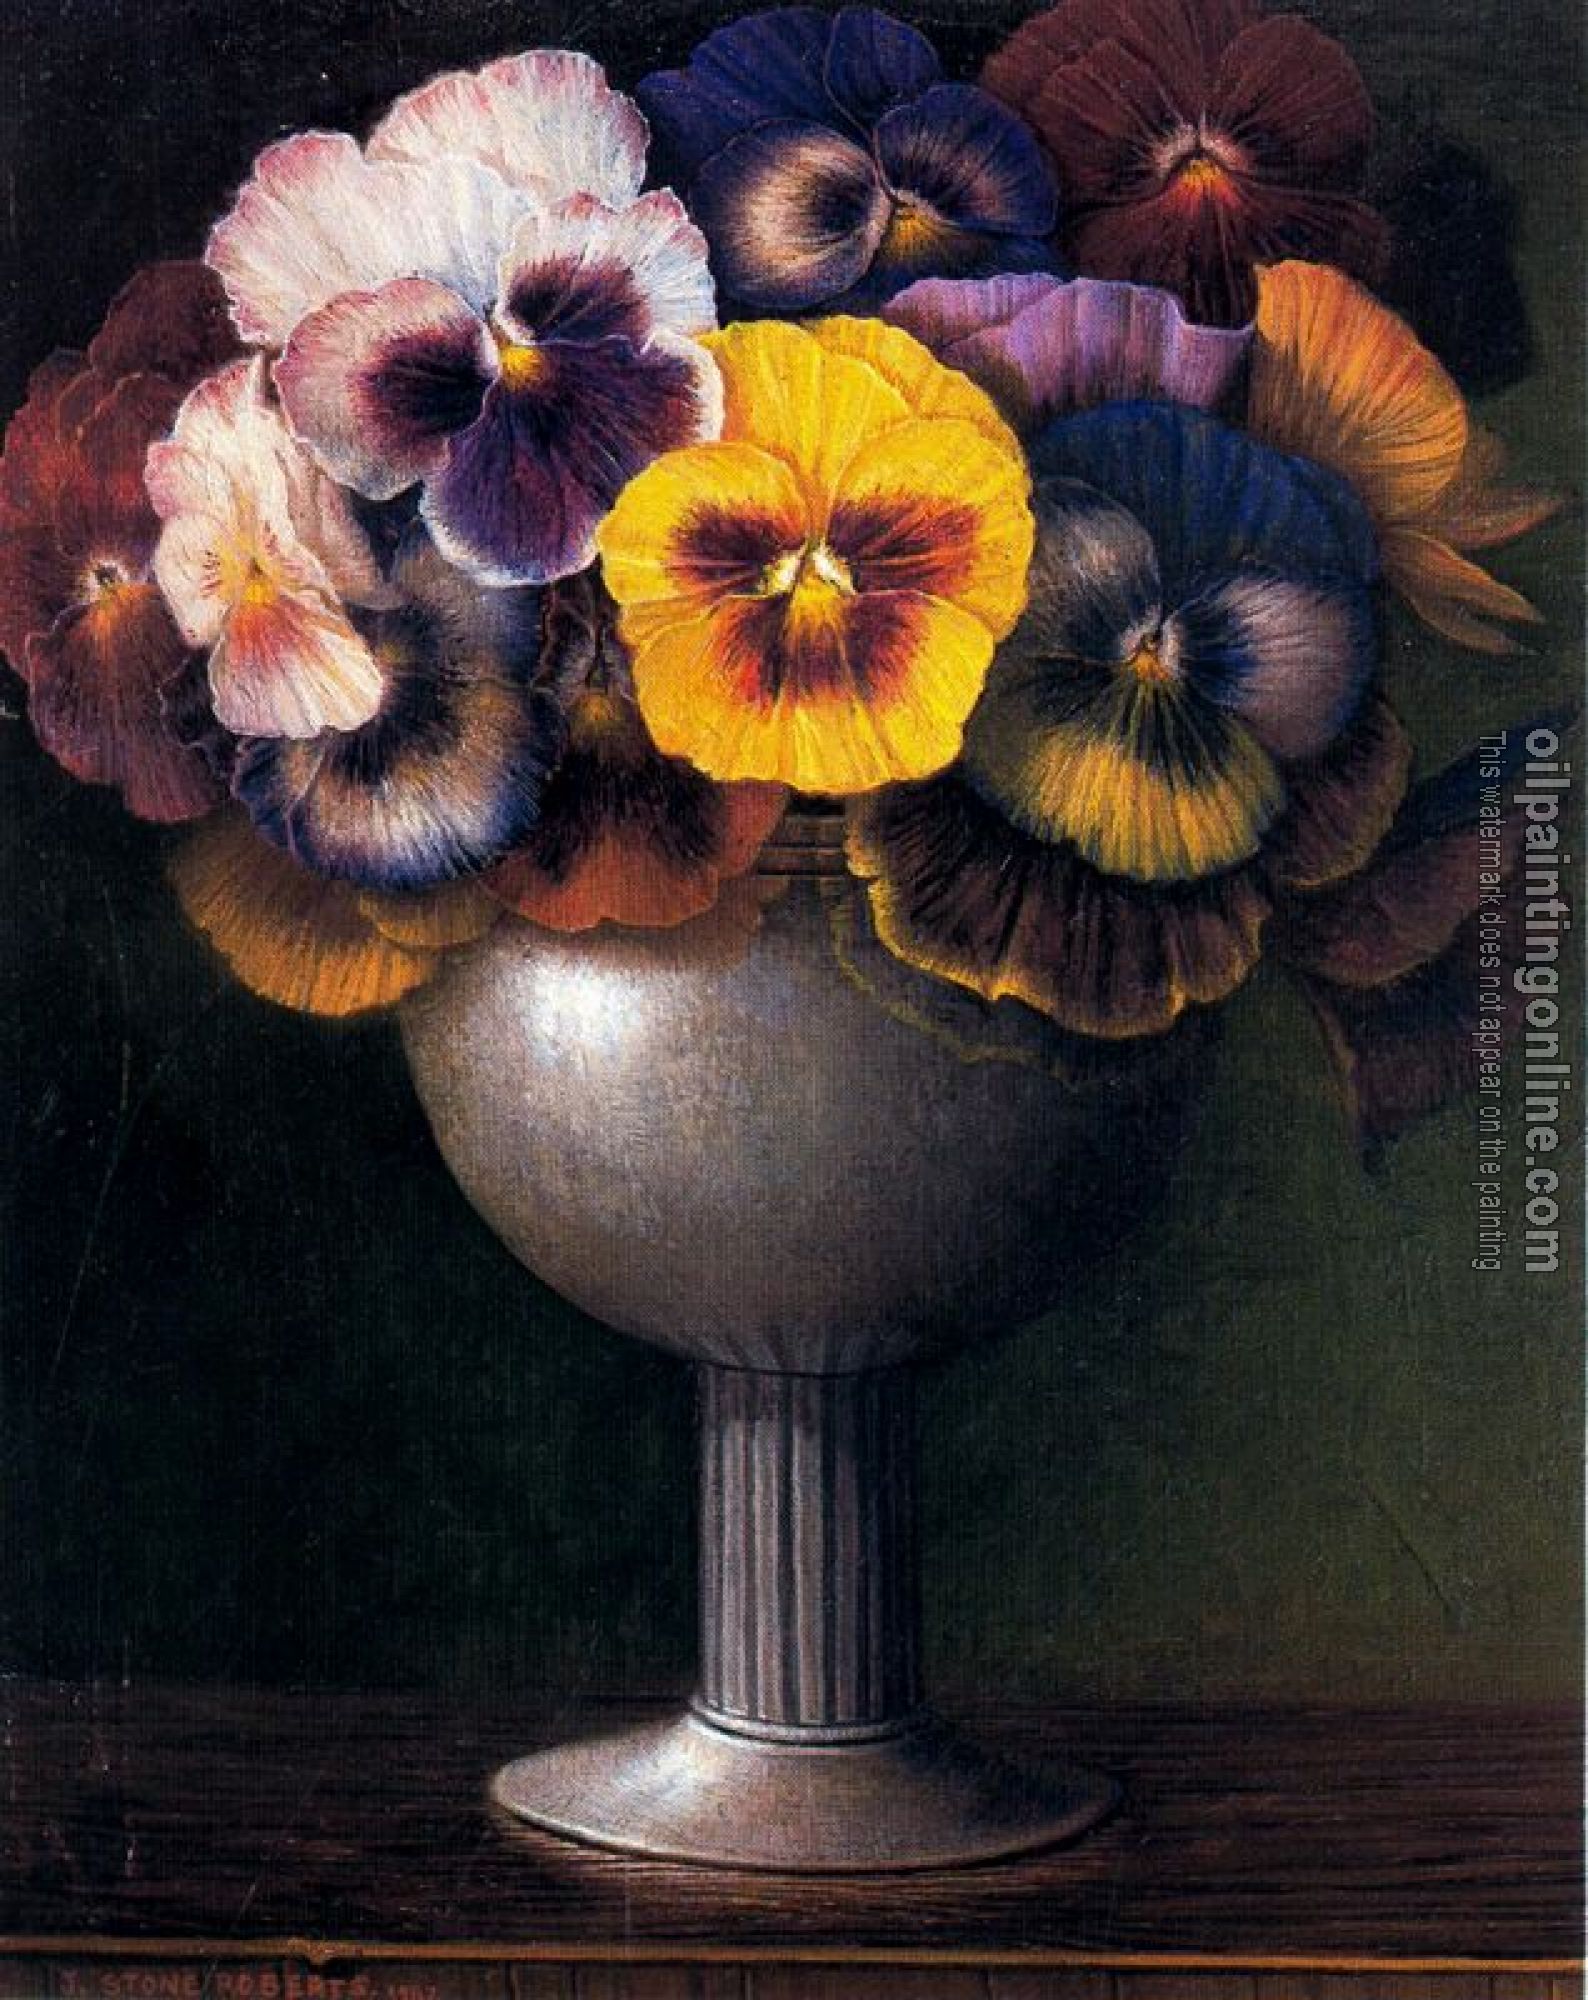 Stone Roberts - Pansies and goblet